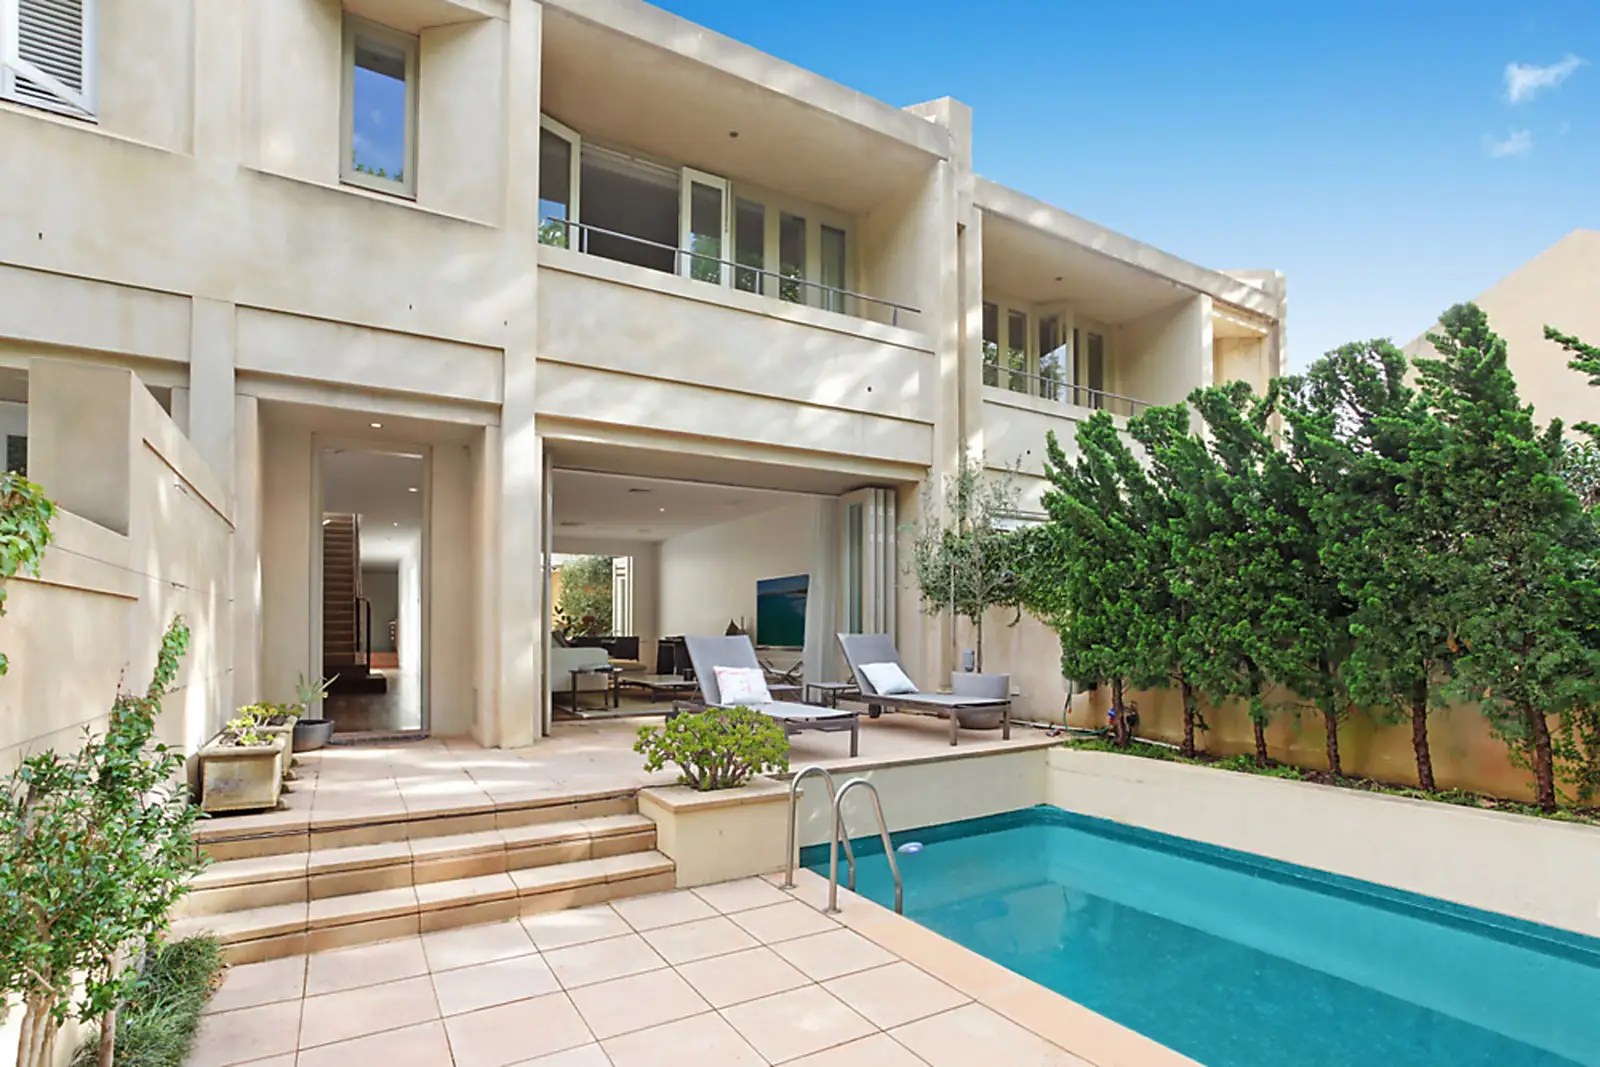 Photo #1: 63 View Street, Woollahra - Sold by Sydney Sotheby's International Realty